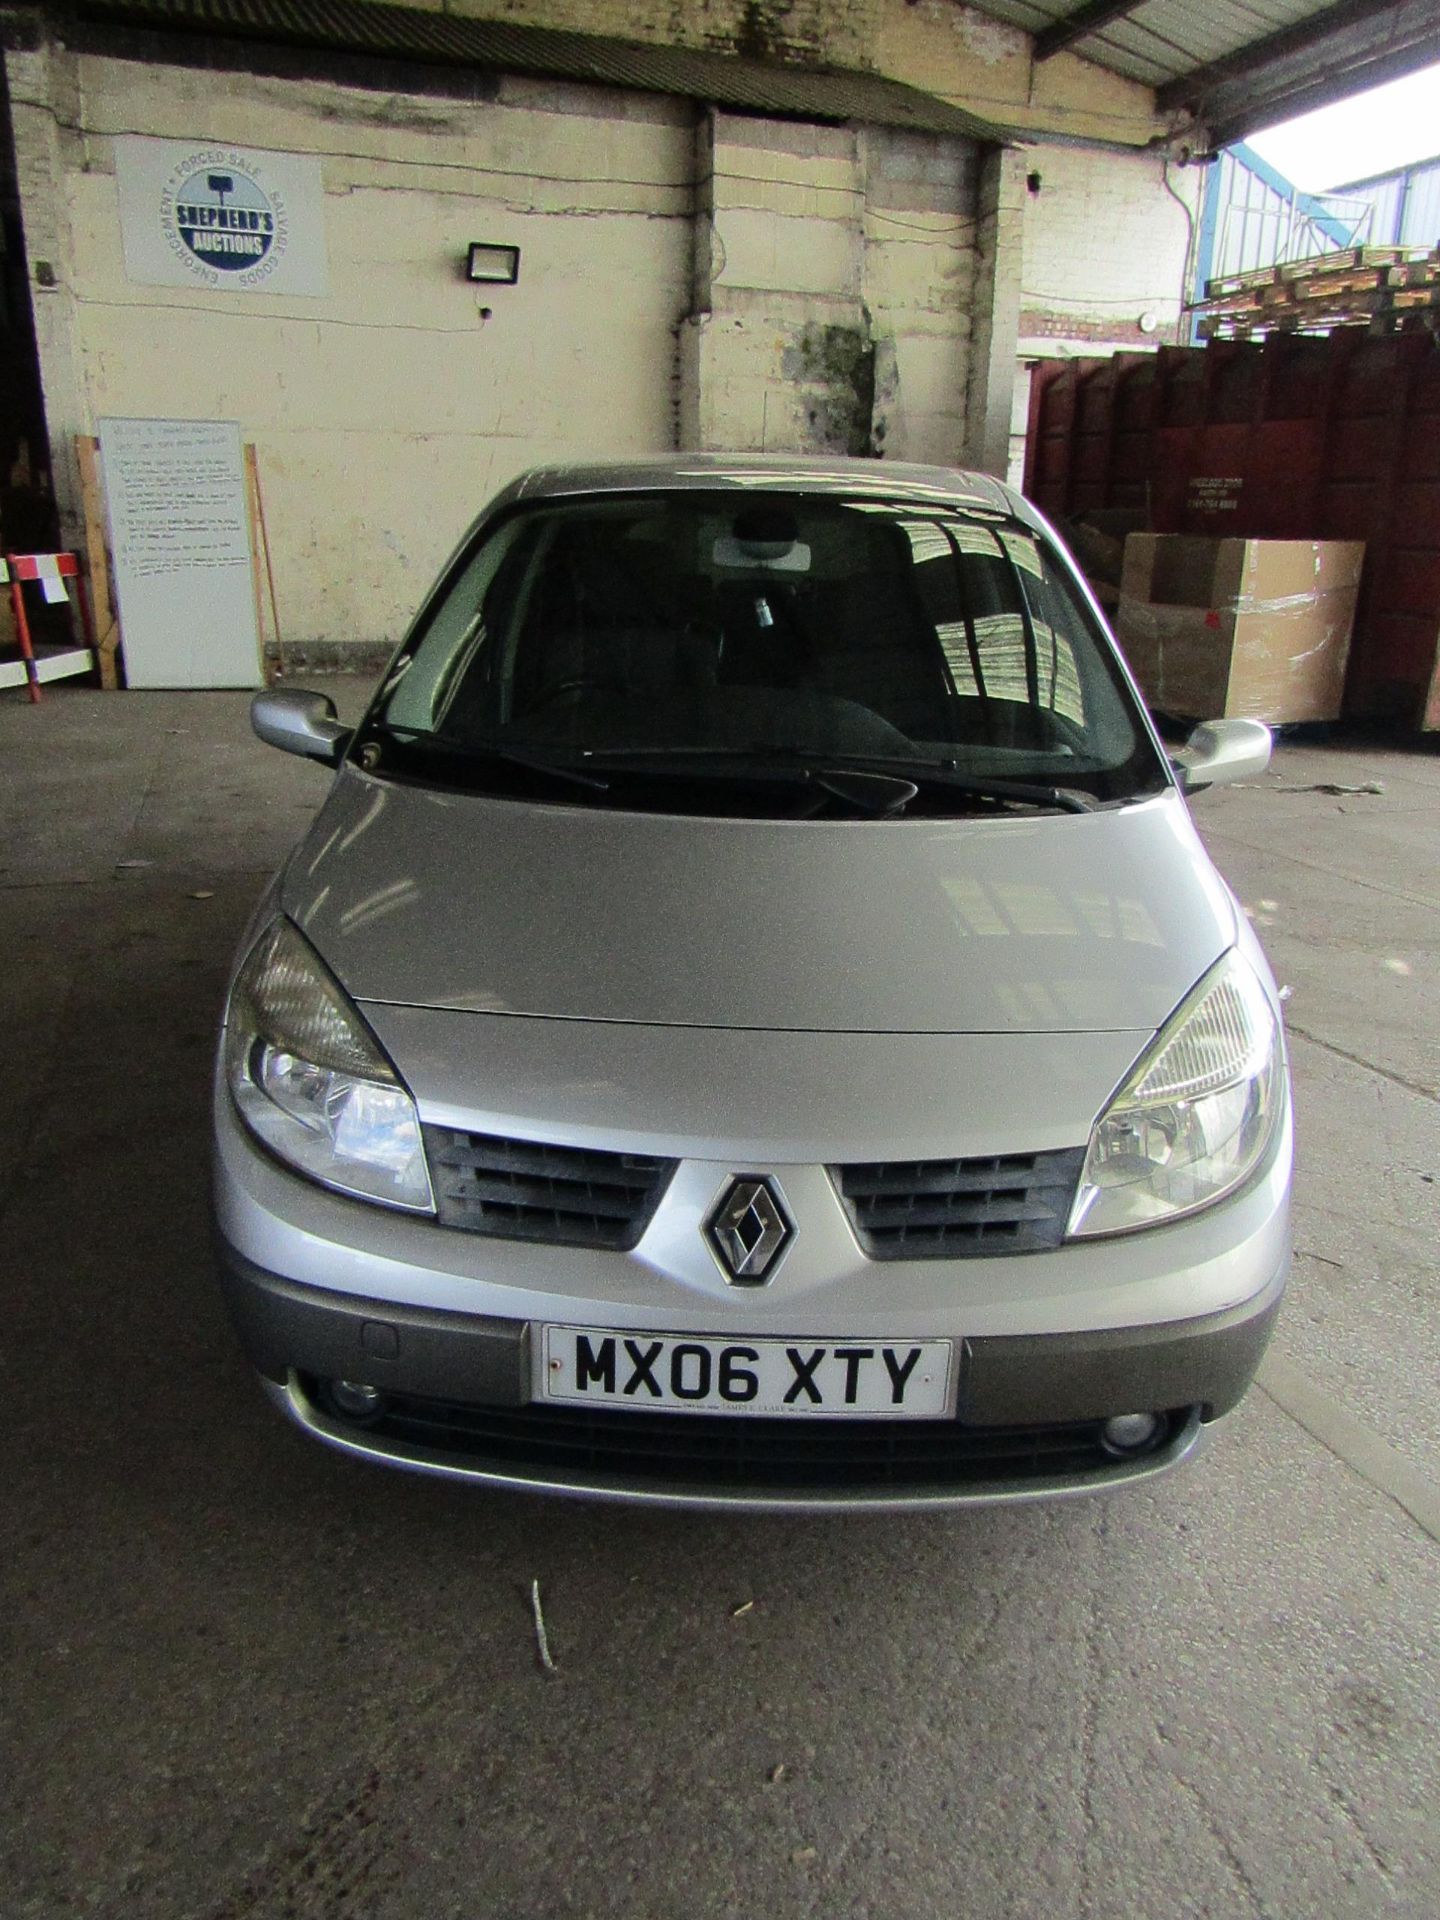 06 Plate Renault Megane Scenic 1.9 diesel, 7 Seats, 2 Keys, 82,793 miles appears to match up with